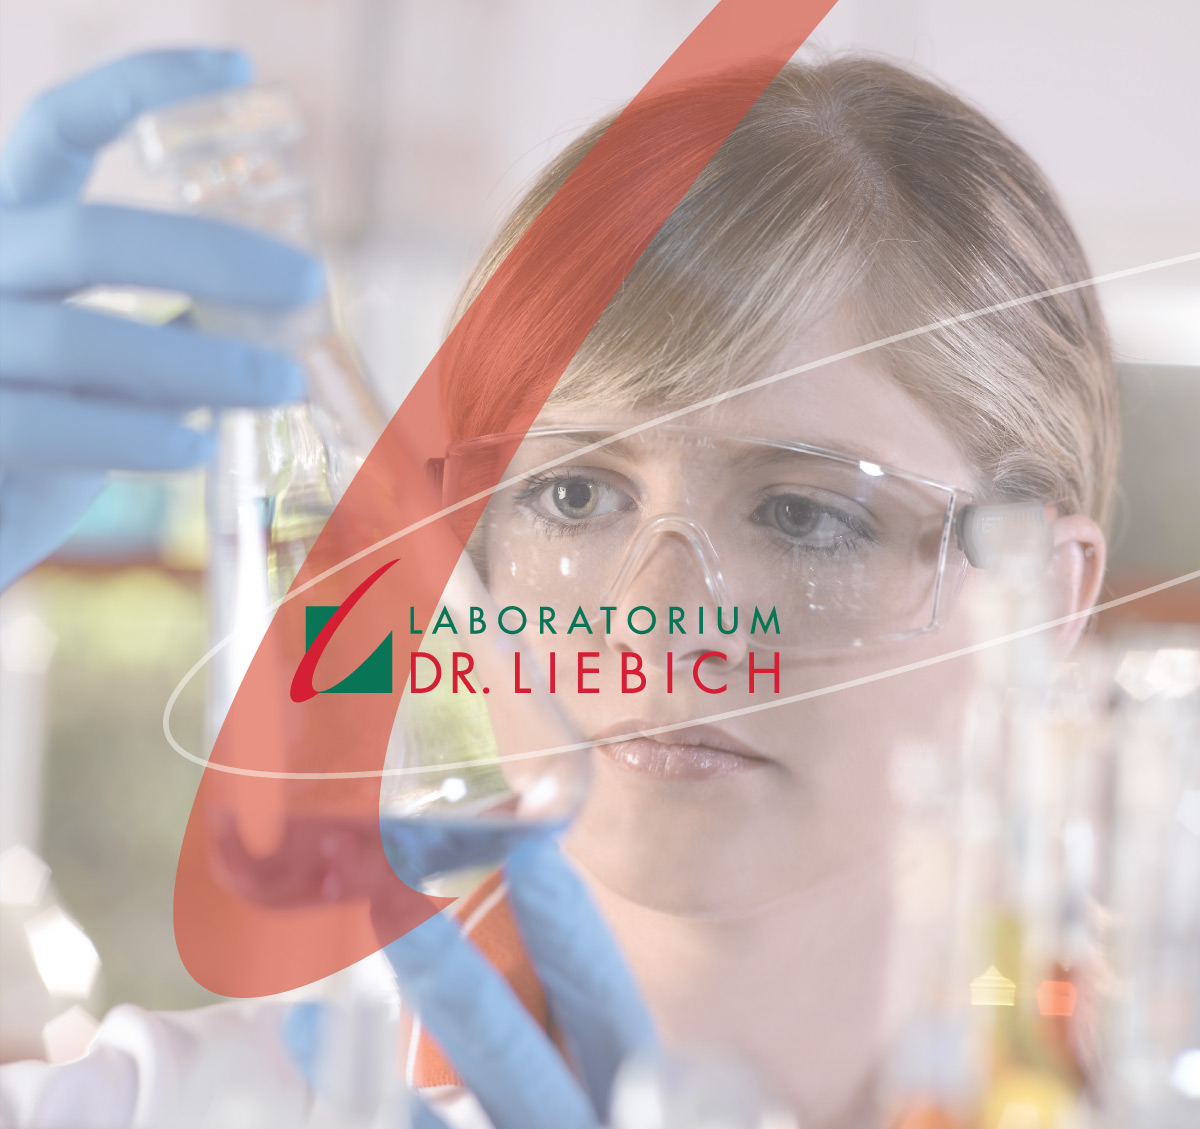 Laboratory staff checking the contents of a flask with the logo of Laboratorium Dr. Liebich on top